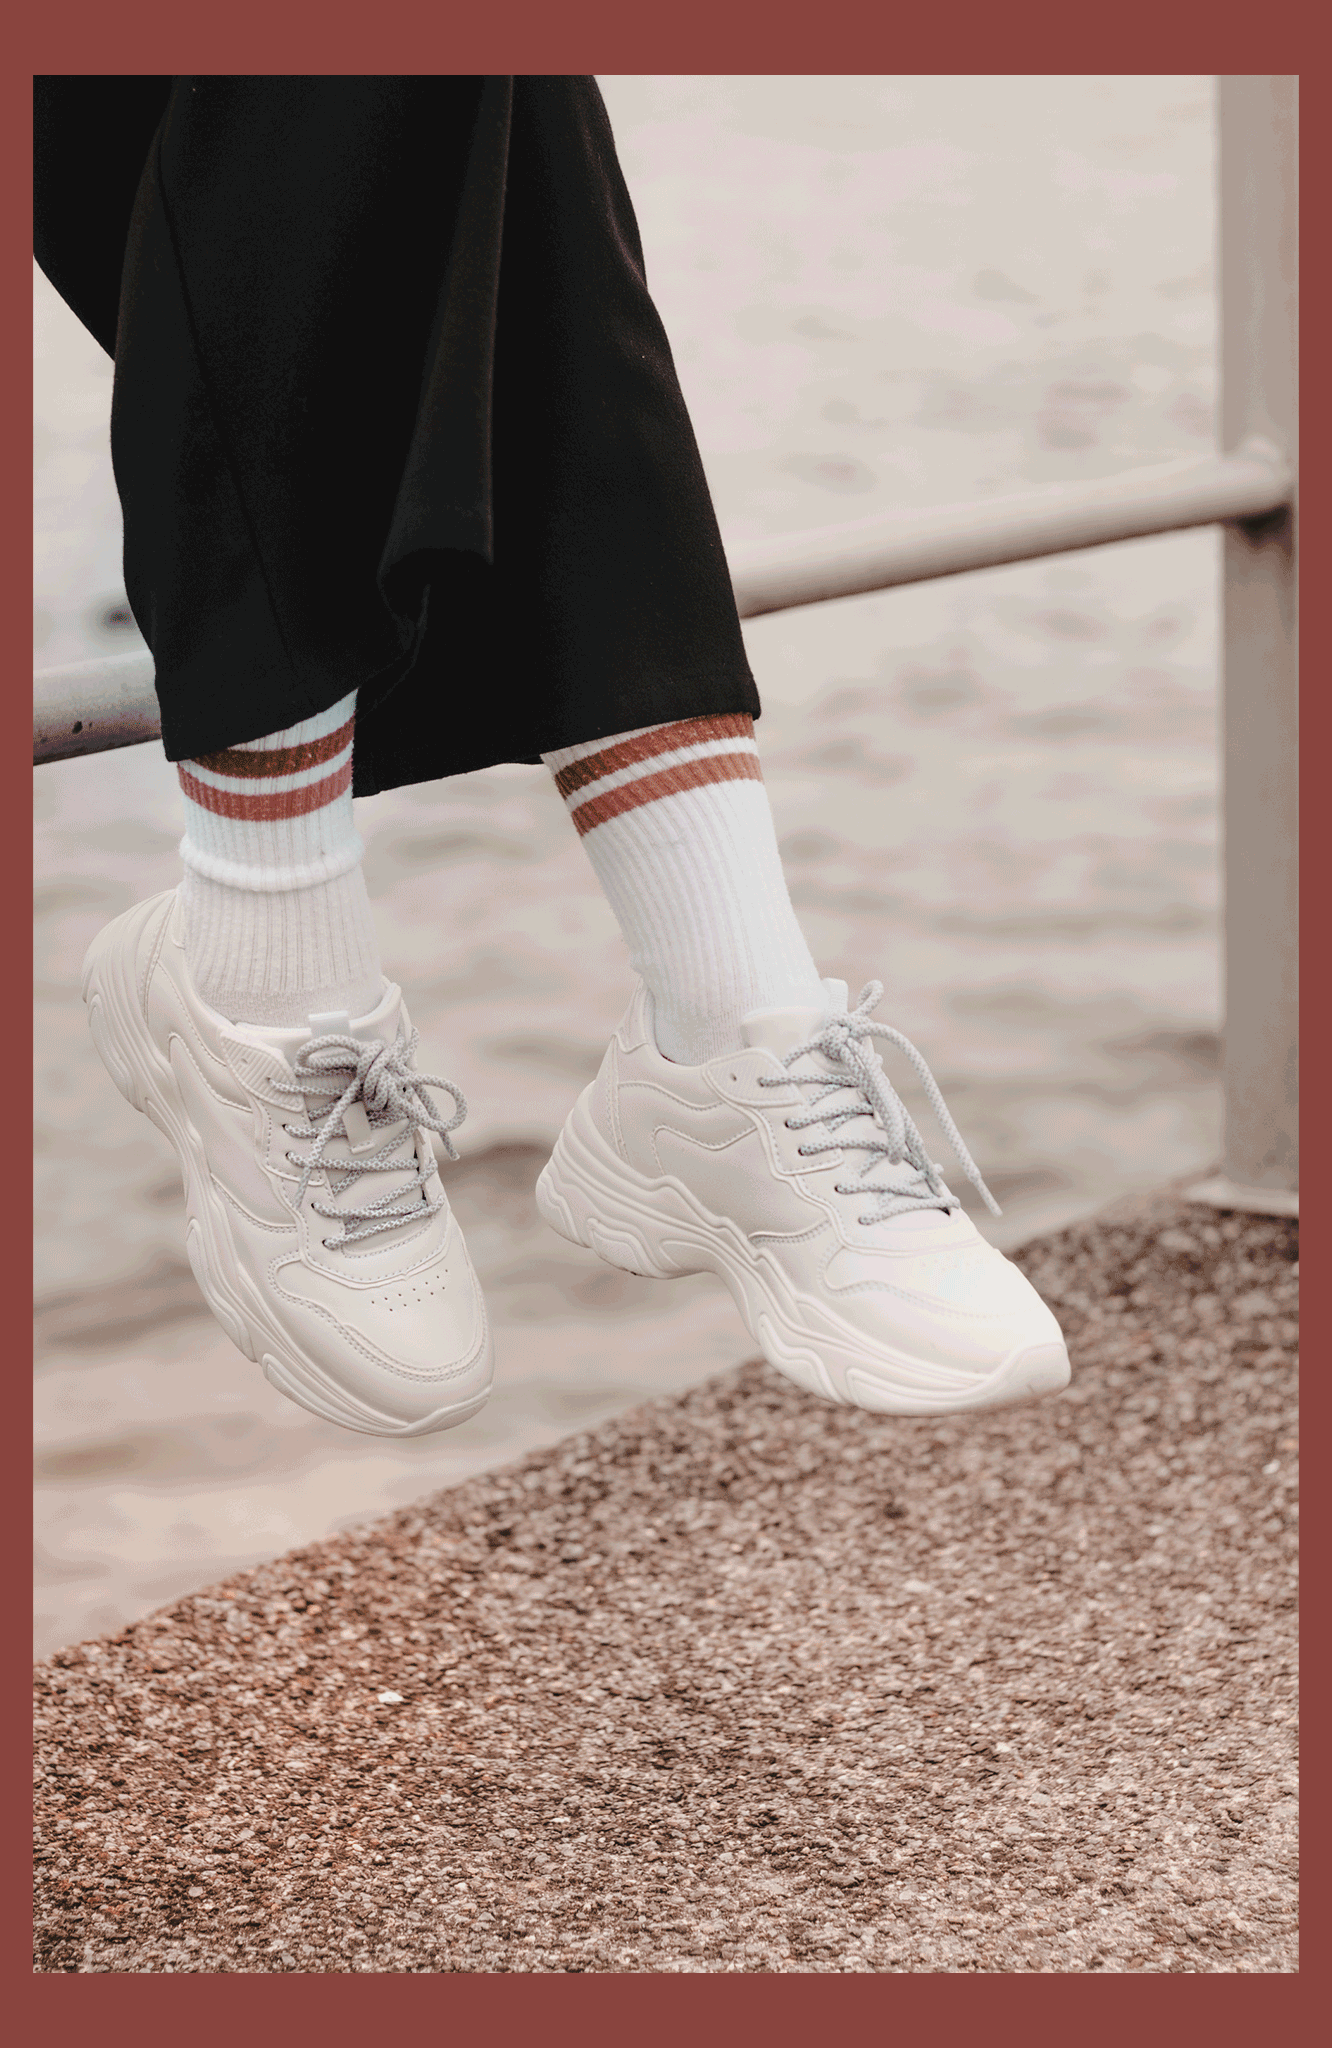 Why these sneakers are the perfect investment right now. #trending #fashion #sneakers #outfit #style #womensfashion #shoes